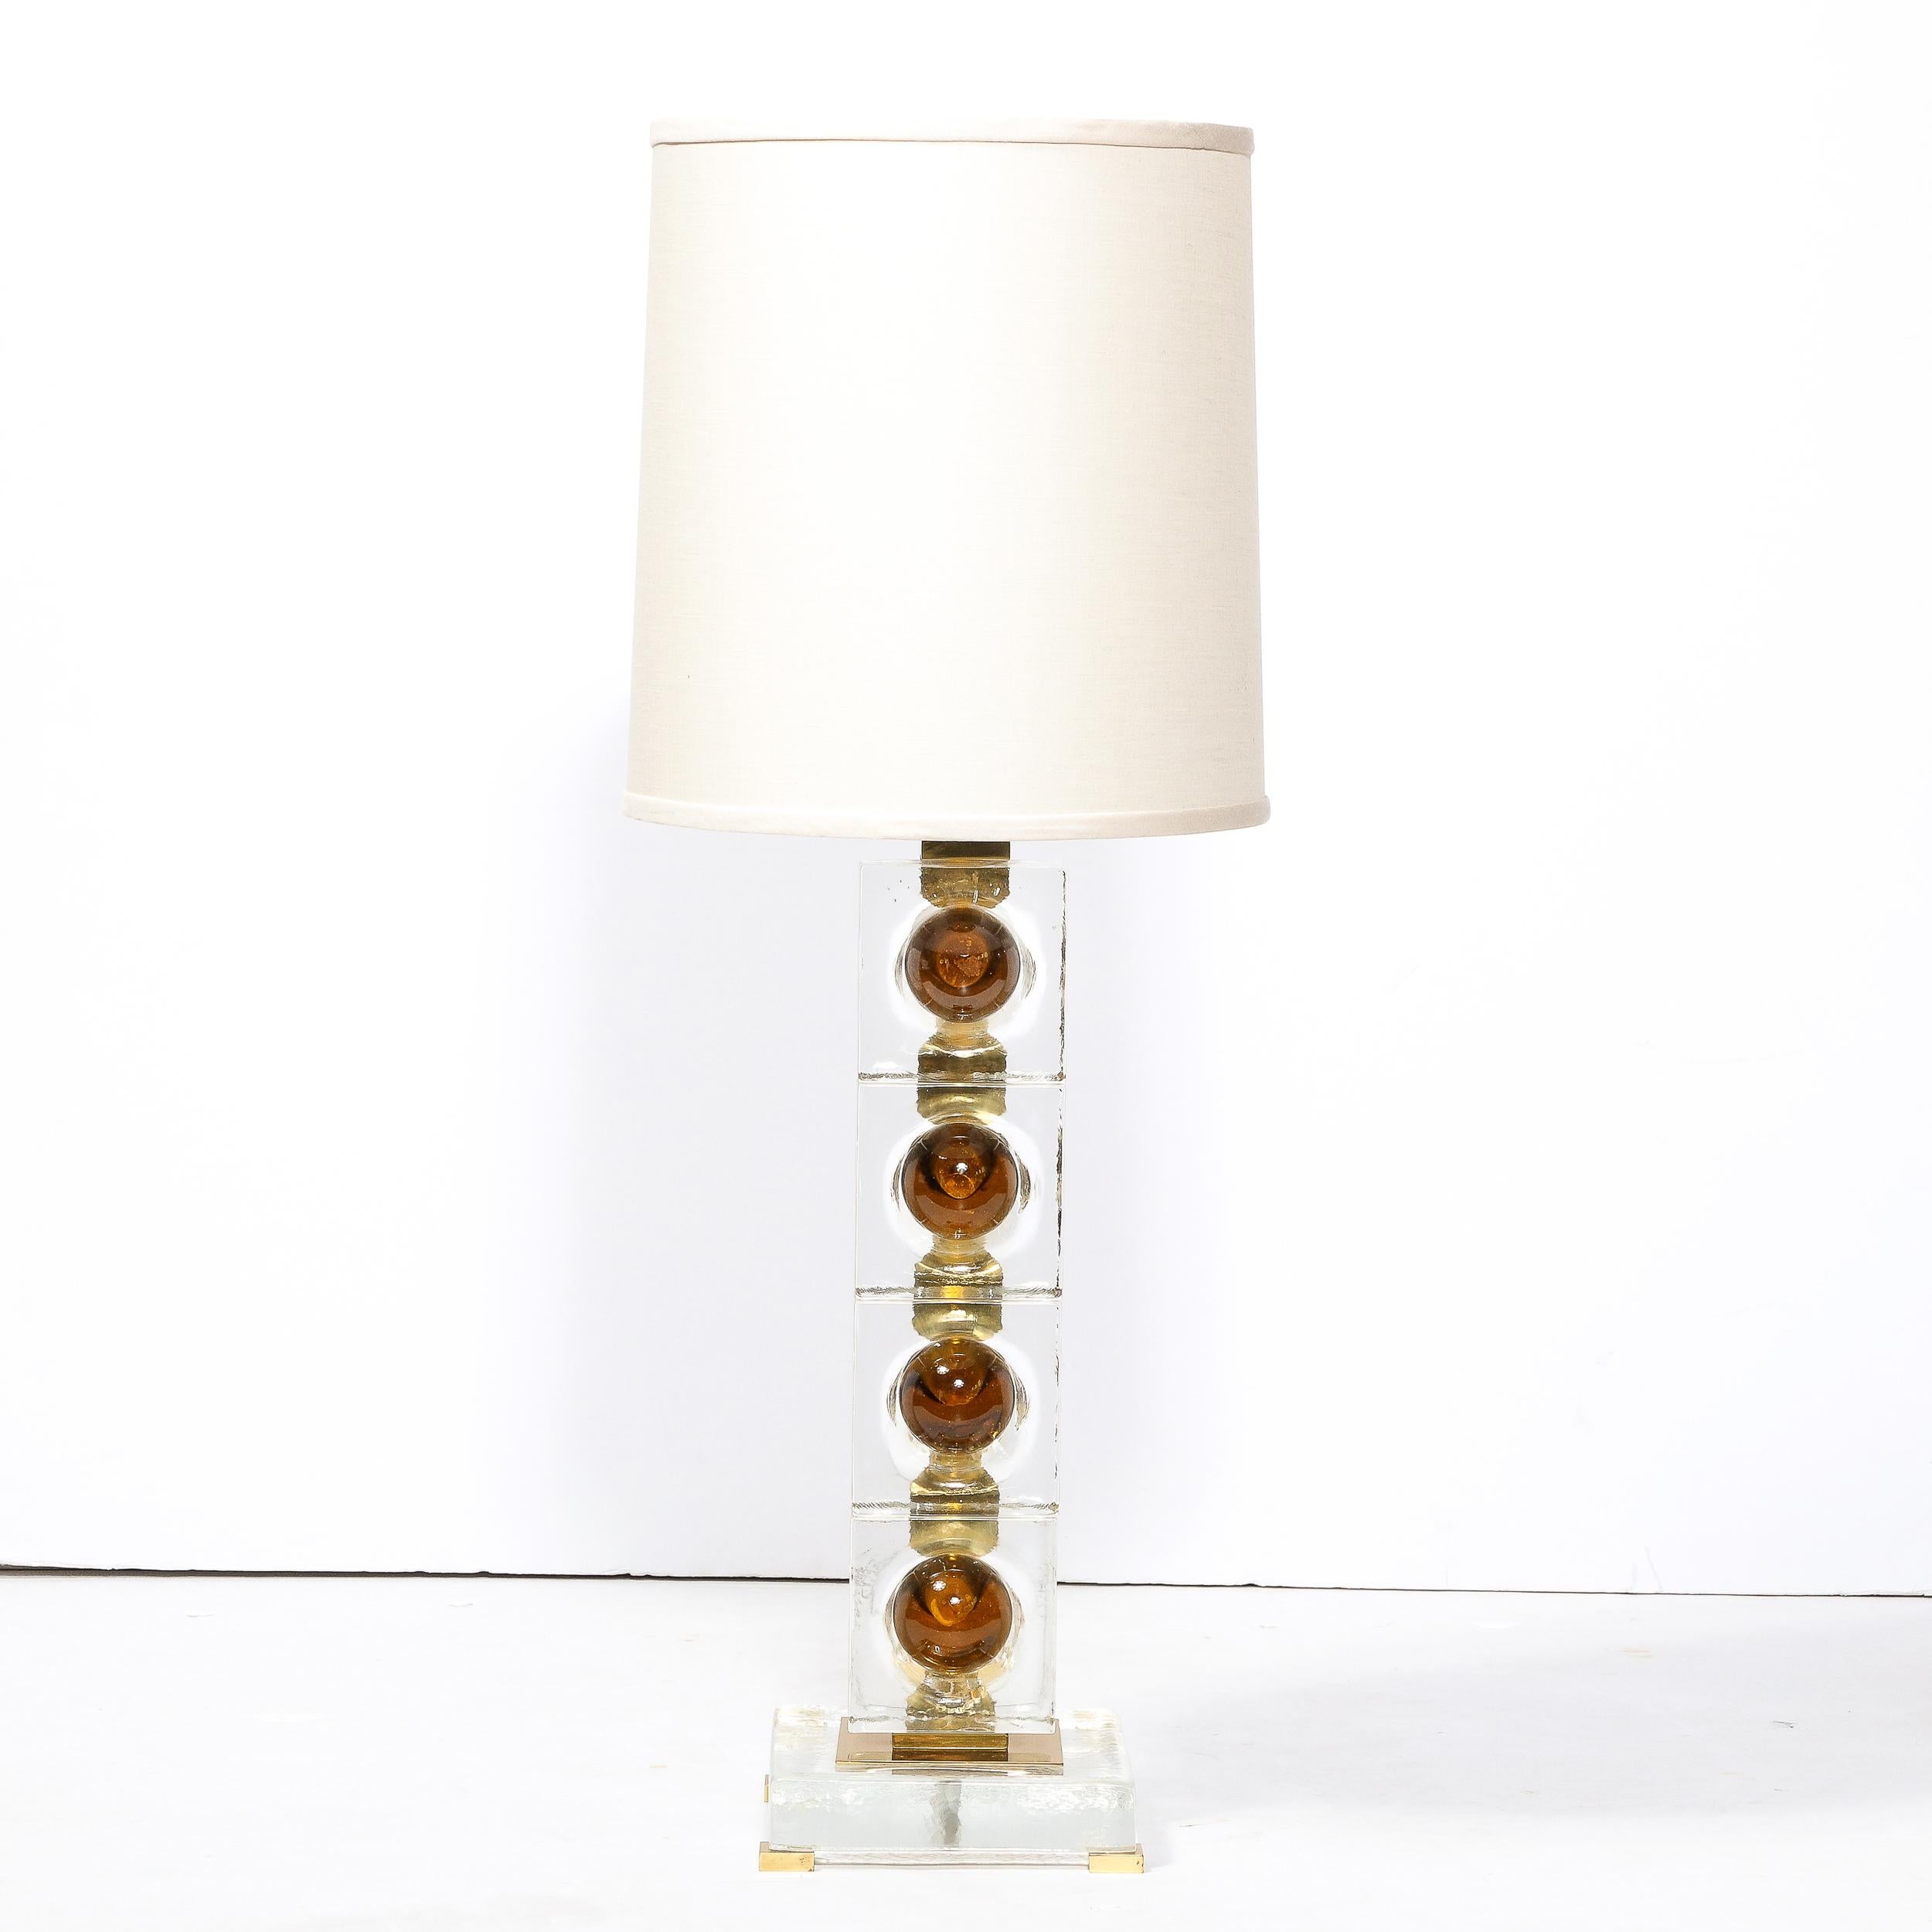 Italian Pair of Modernist Stacked Sphere Table Lamps in Amber & Translucent Murano Glass